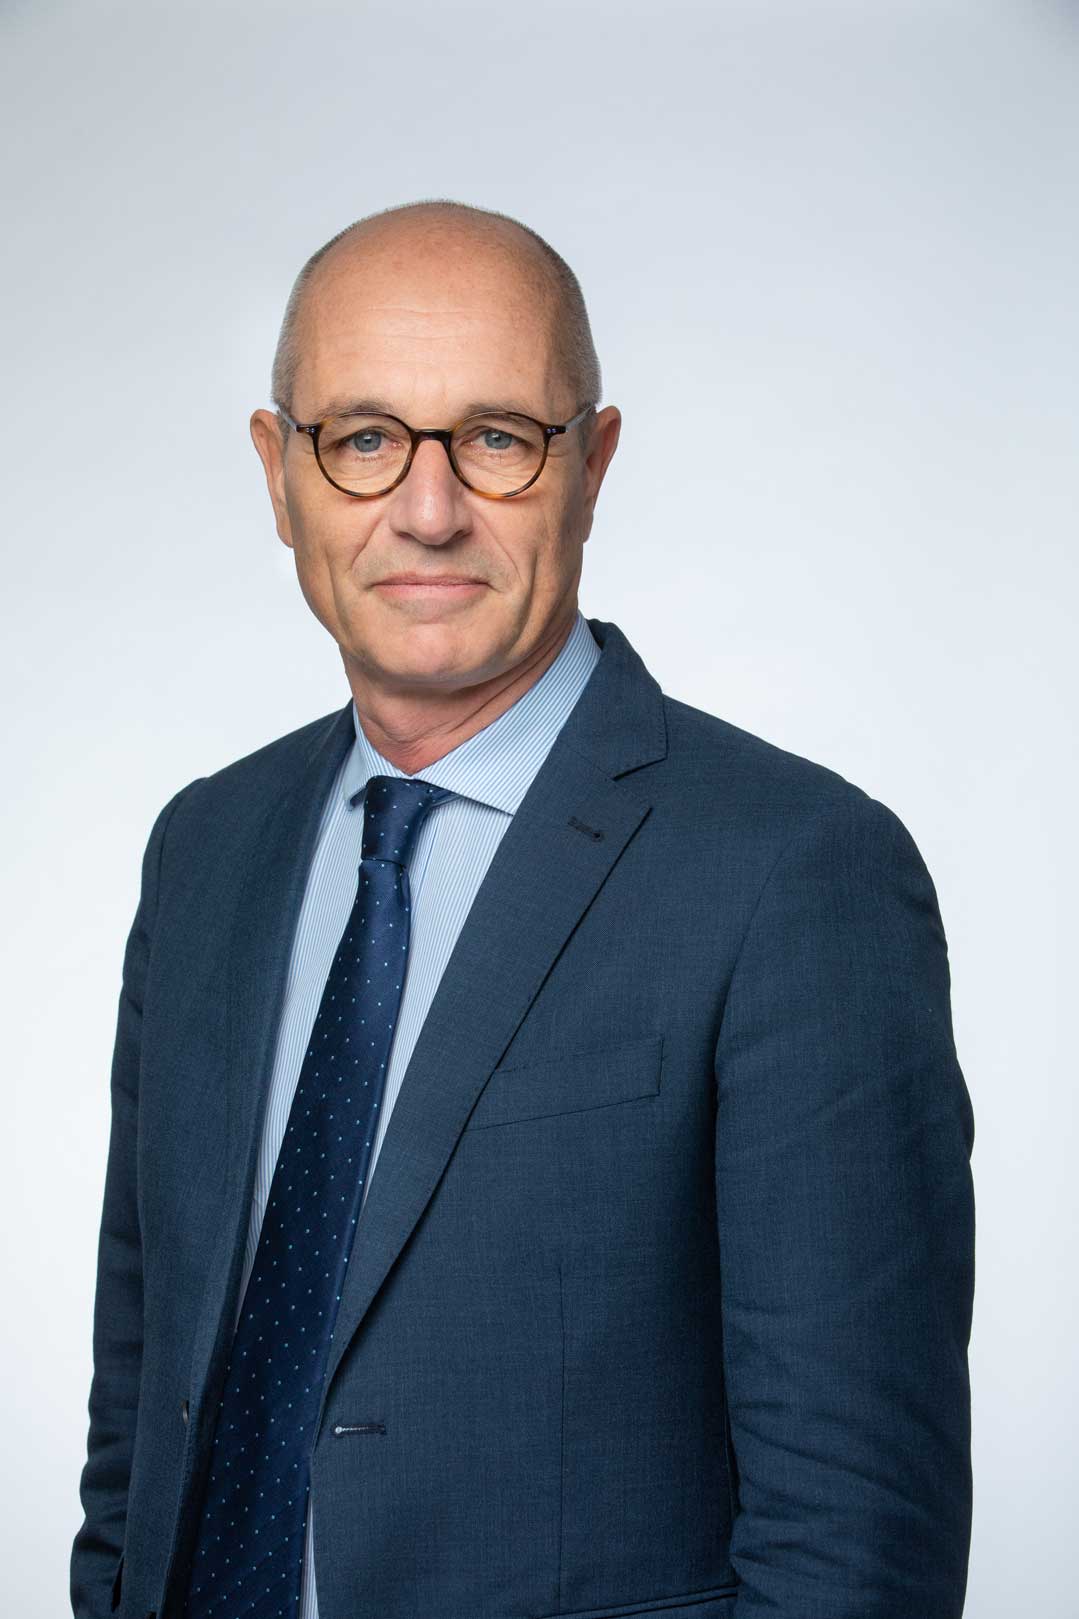 Christophe Périllat: Director and Deputy Chief Executive Officer